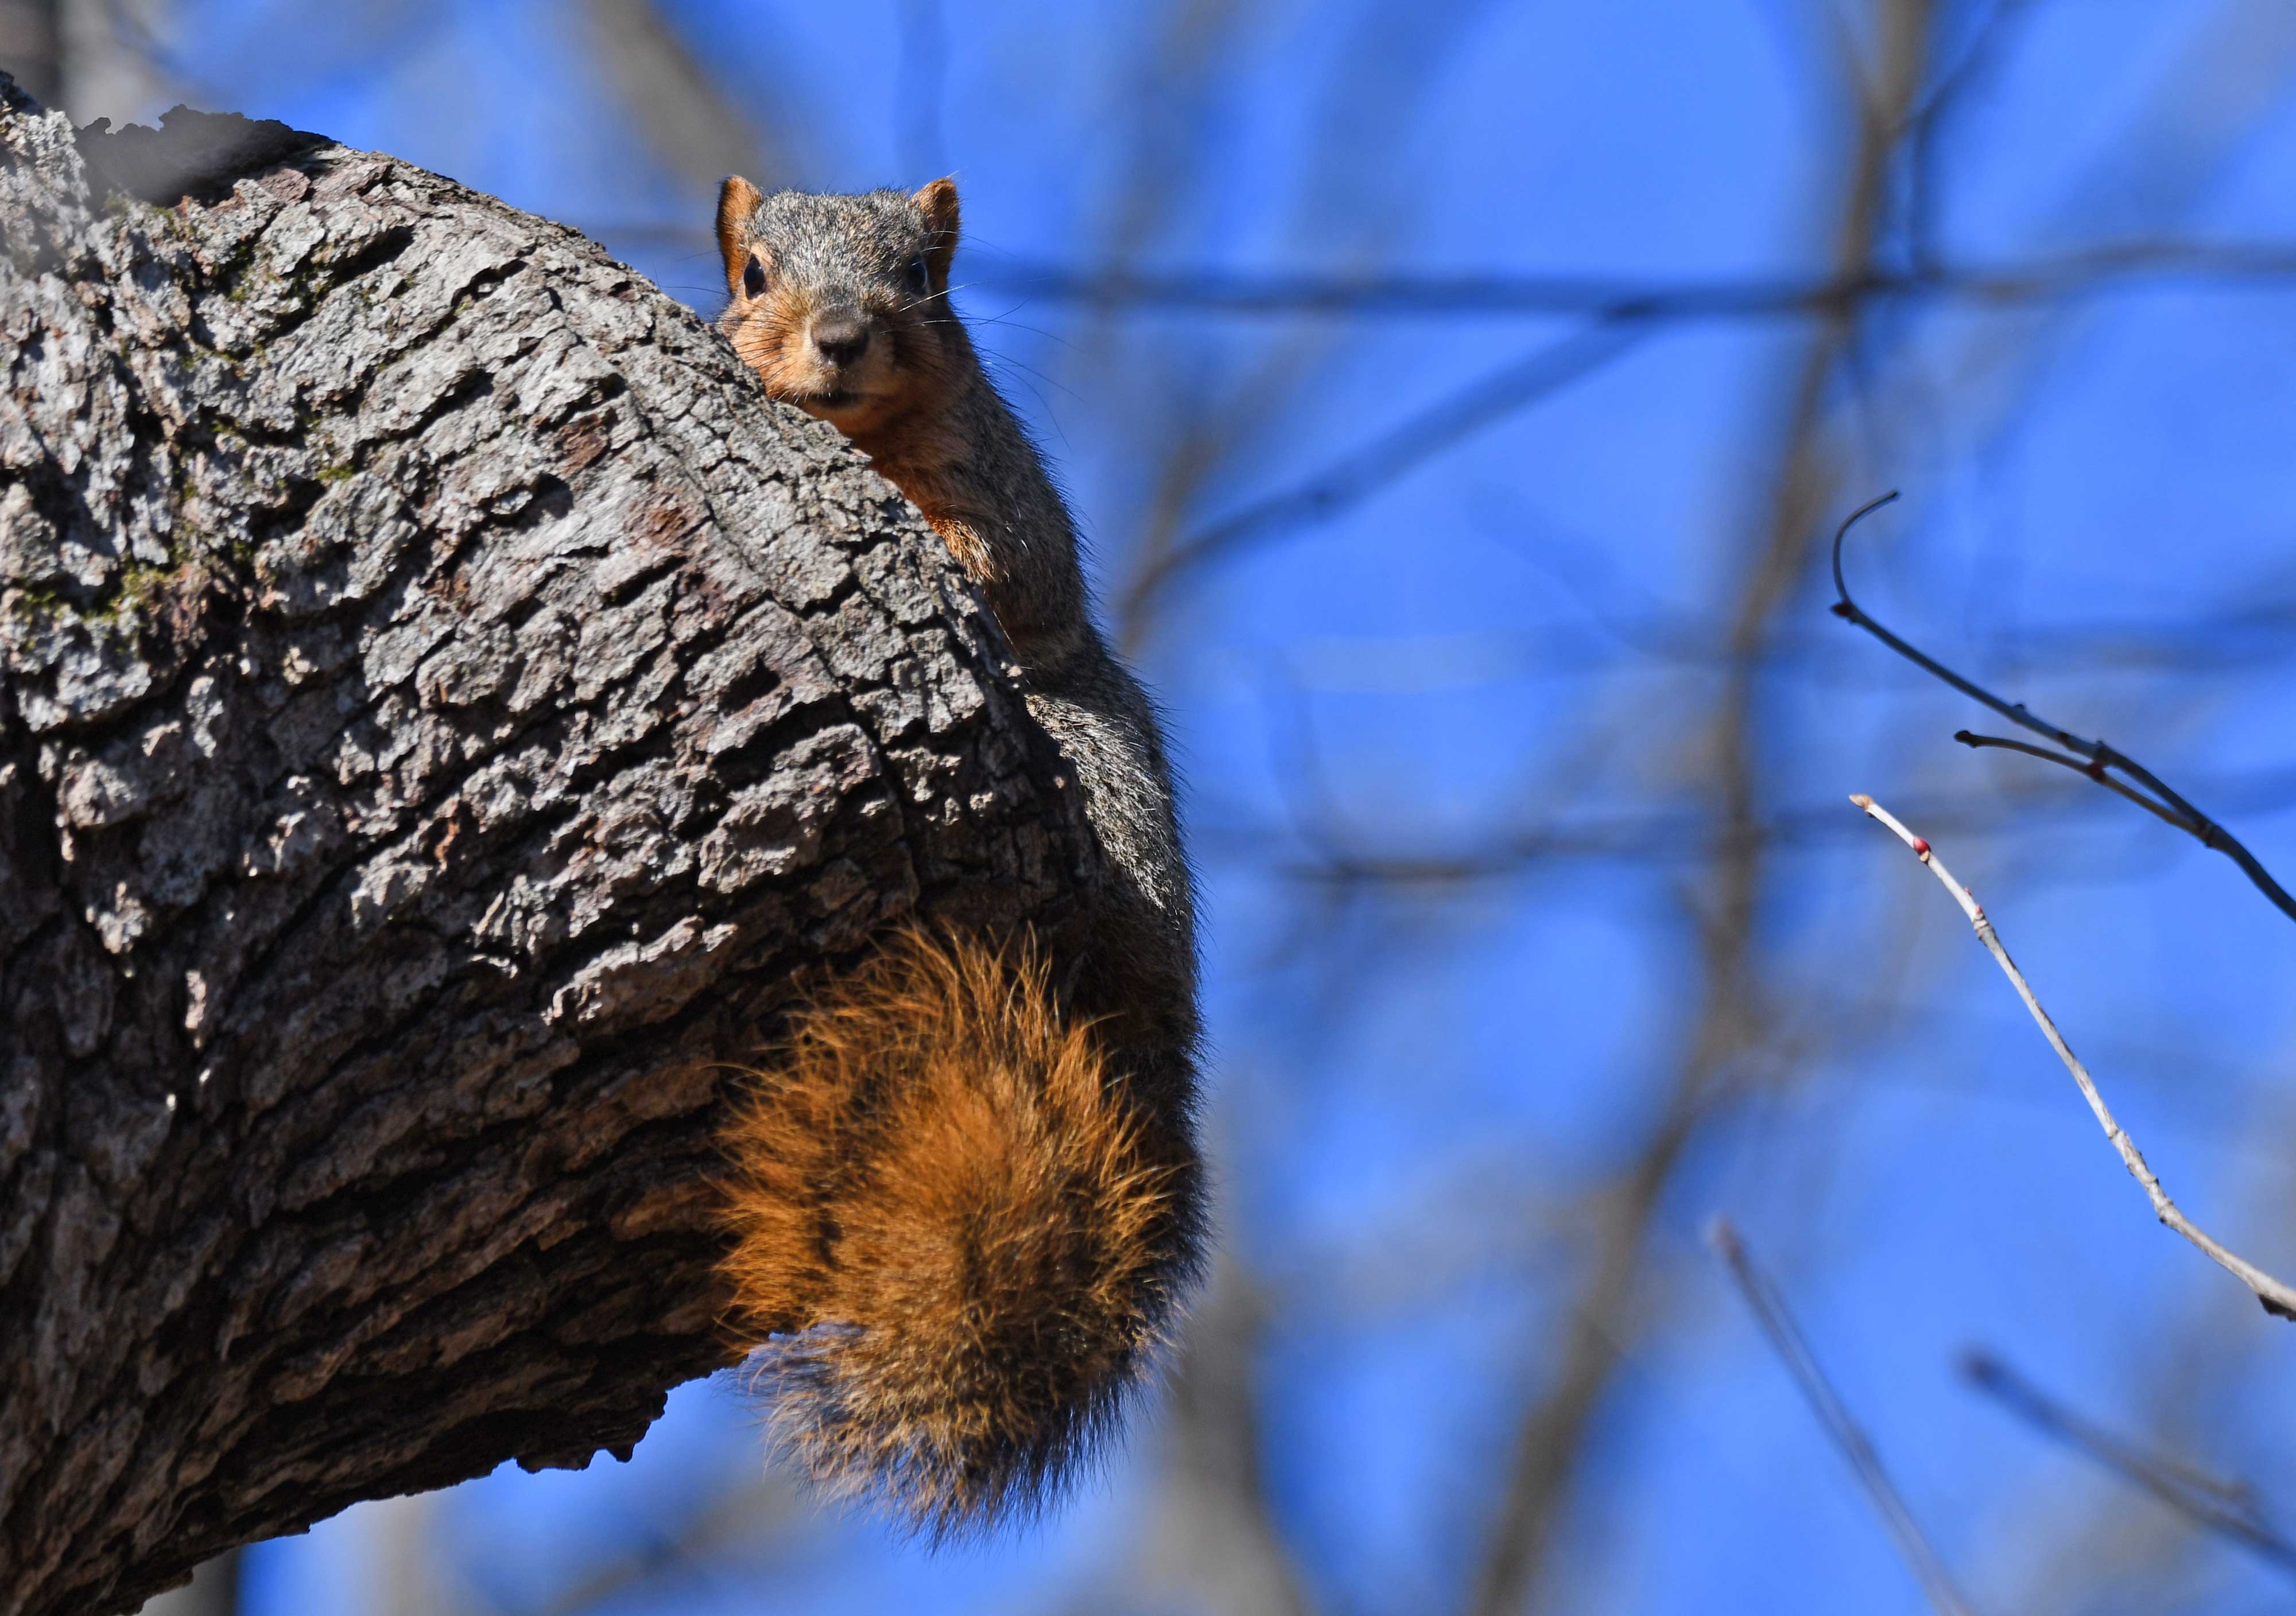 A squirrel holding on to a tree limb.